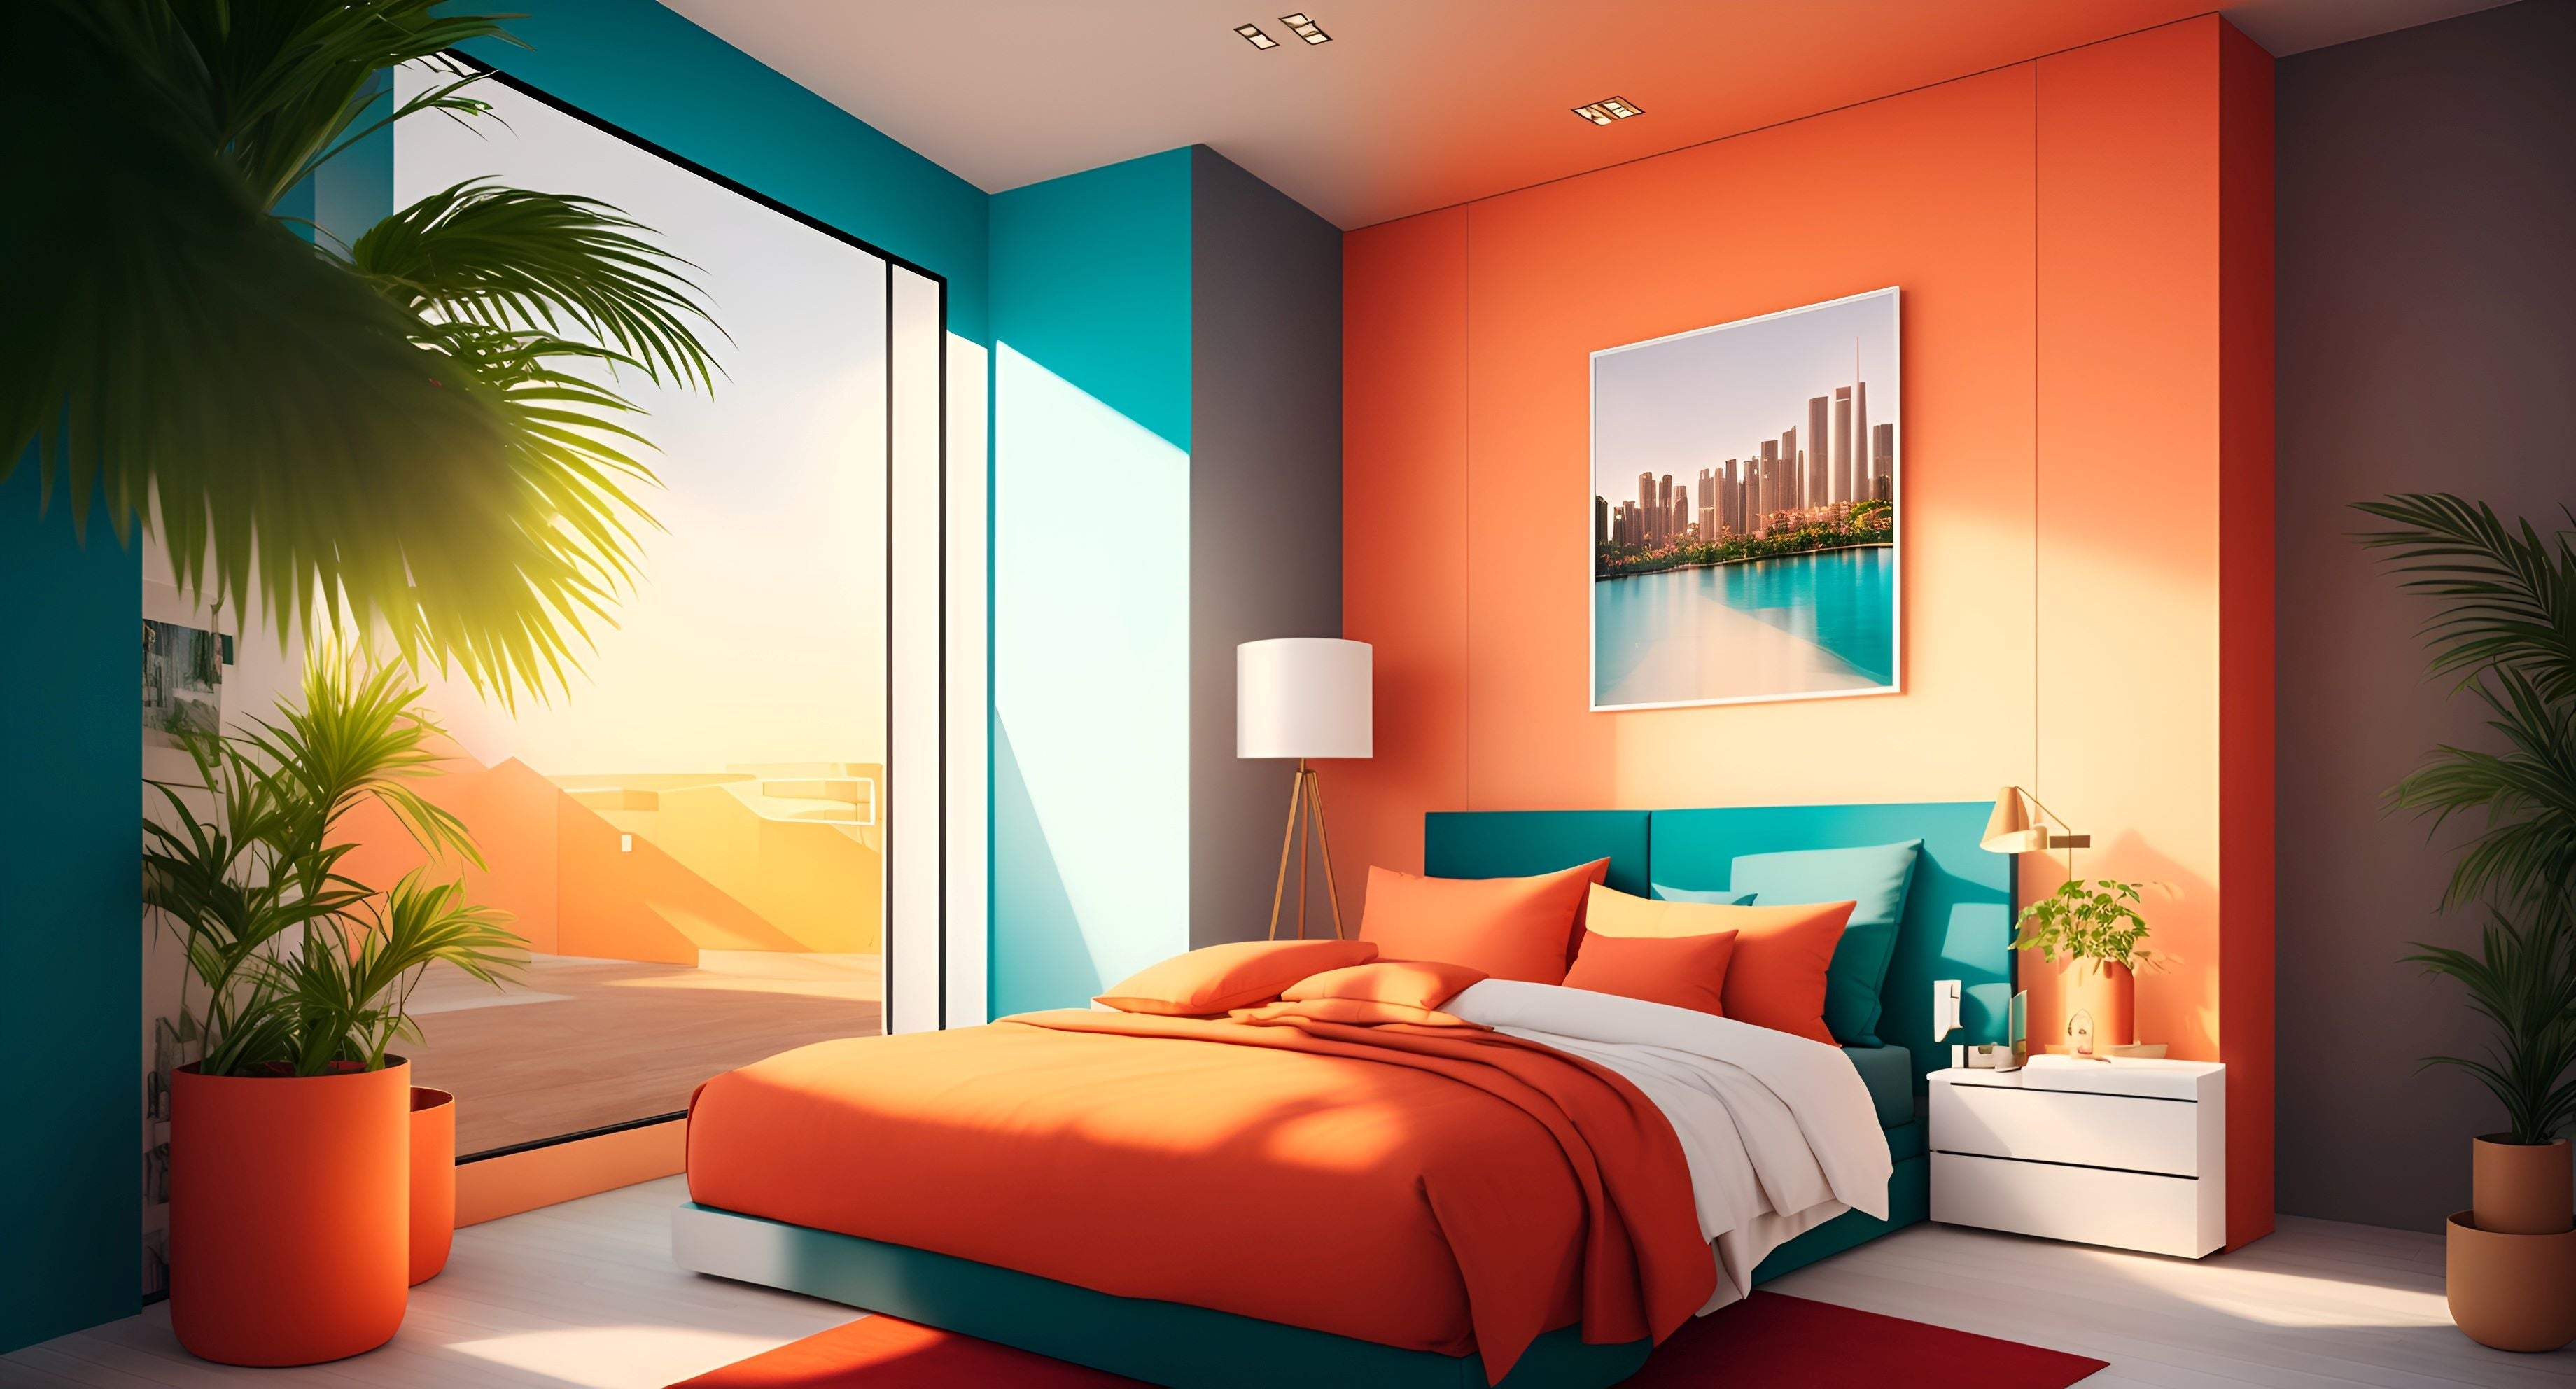 Illustration of a cozy bedroom with a vibrant orange and blue color scheme